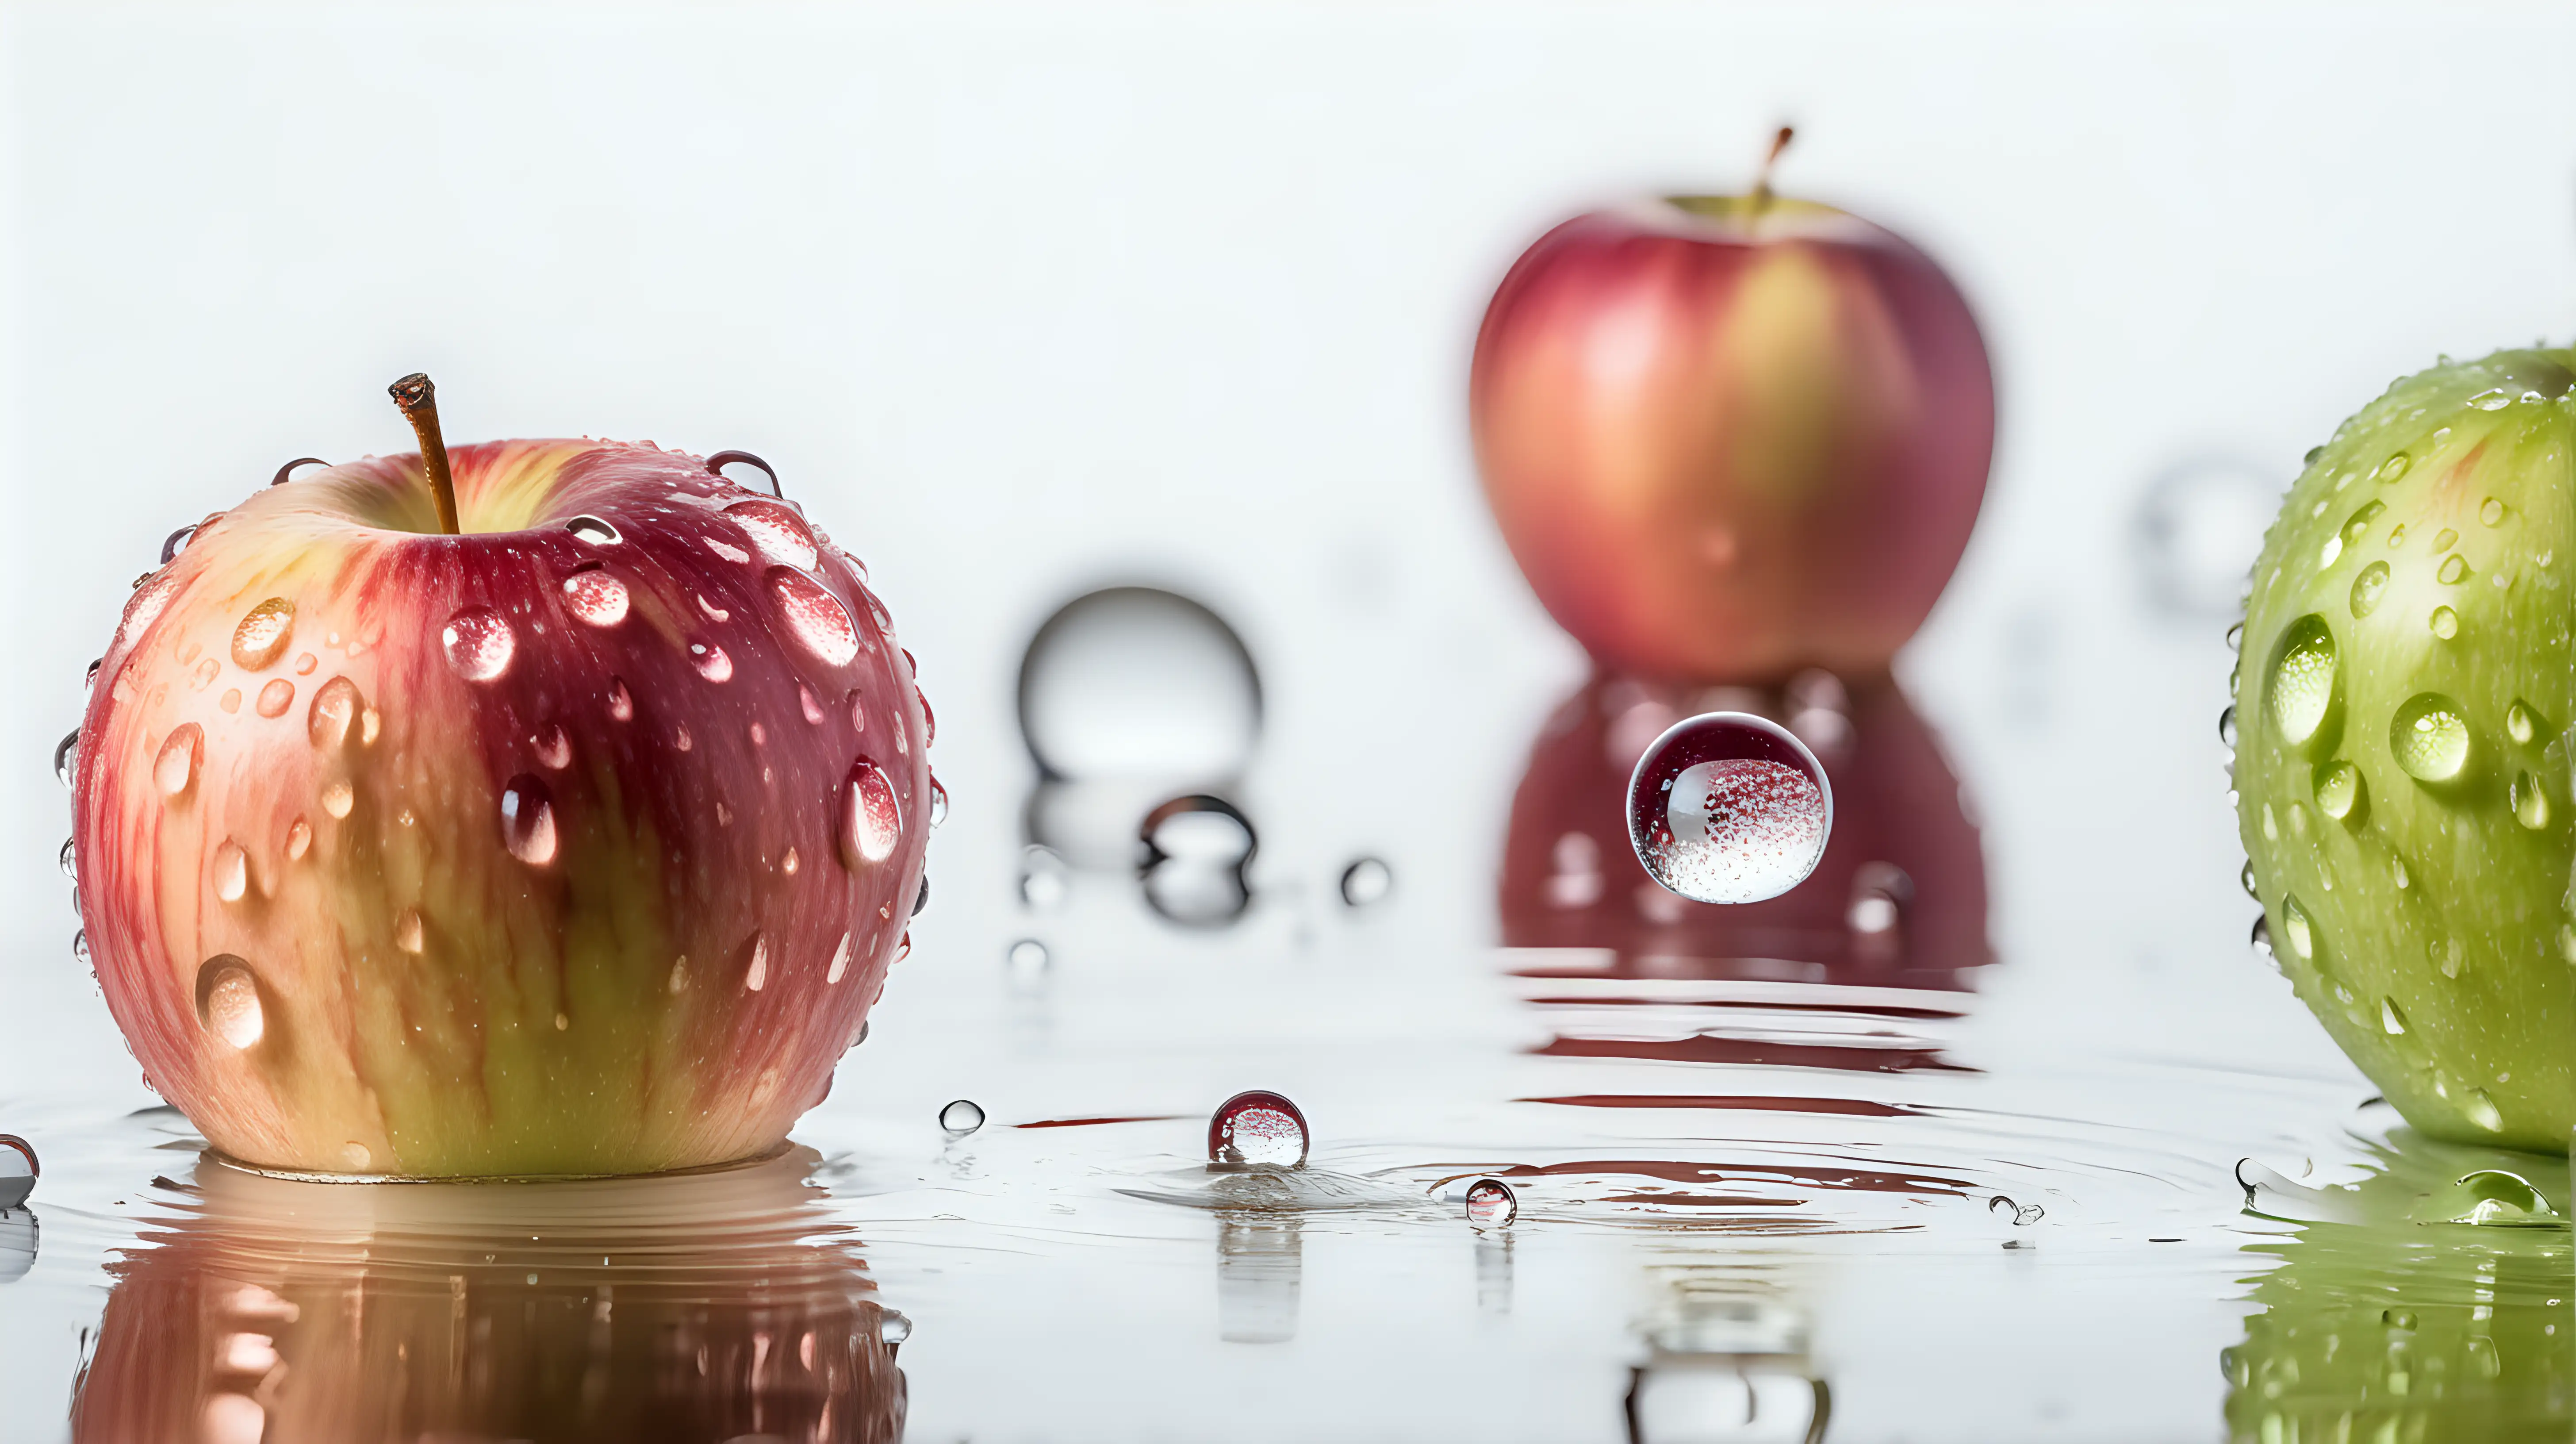 Glistening Dewdrops: Focus on the water droplets clinging to the surface of the apple, reflecting light against the white backdrop. Capture the details of each droplet to add a touch of freshness to the image.



